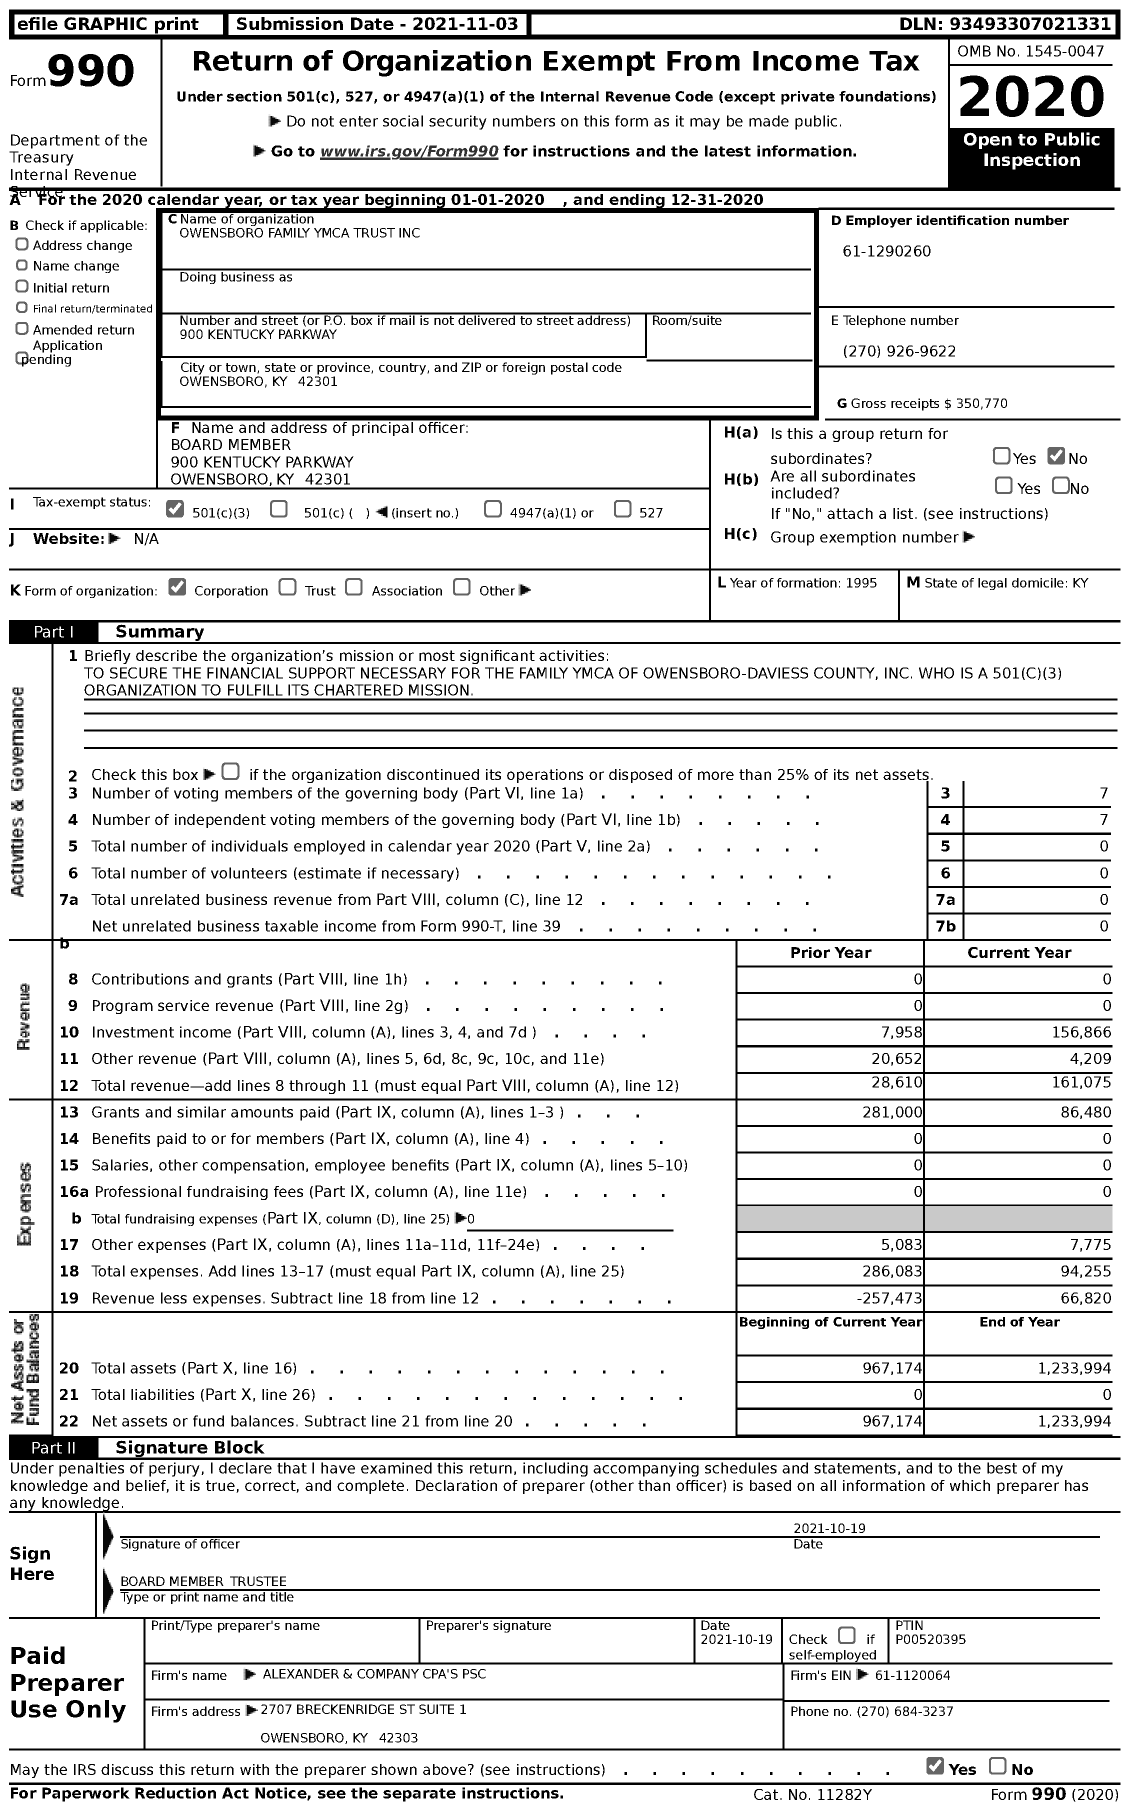 Image of first page of 2020 Form 990 for Owensboro Family Ymca Trust